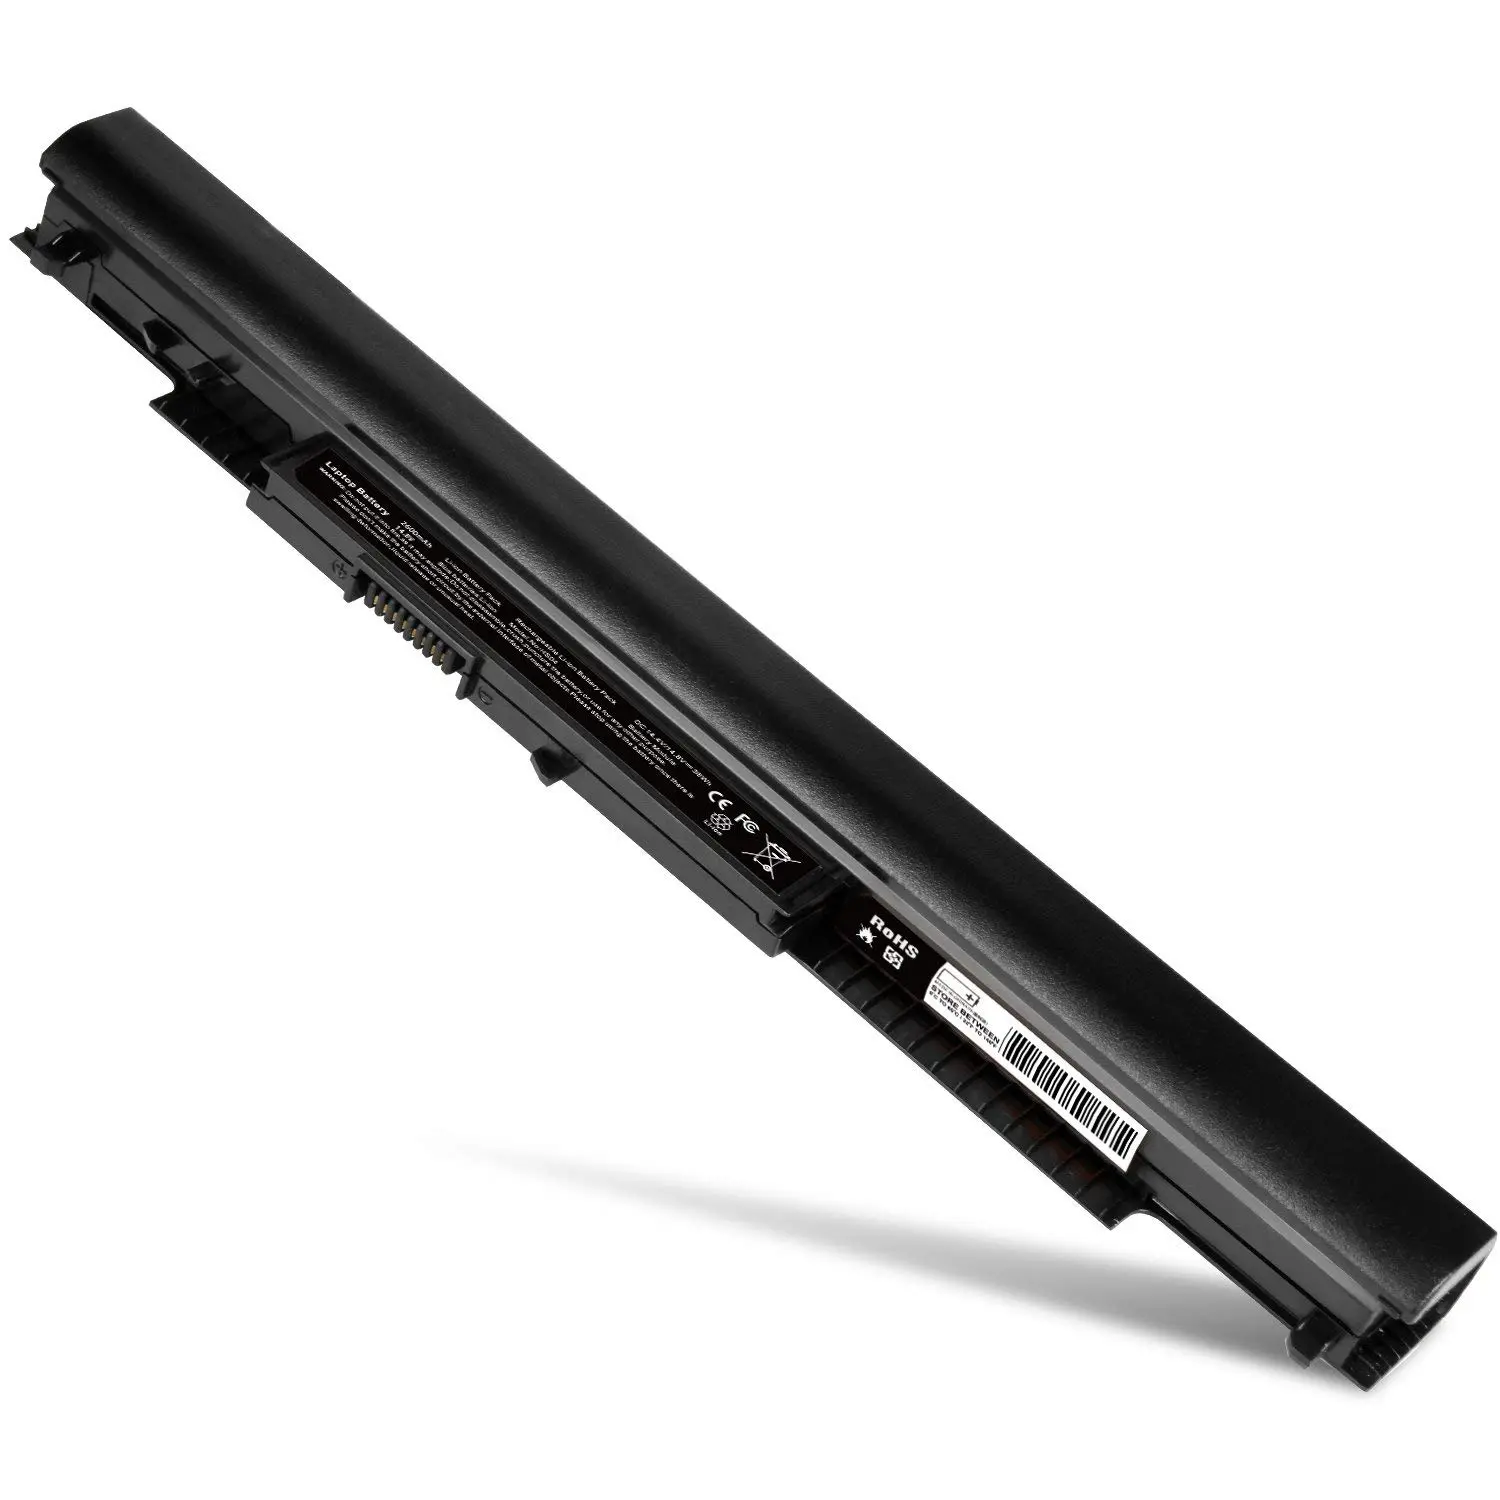 hewlett packard laptop battery replacement - How much does it cost to replace battery in HP laptop